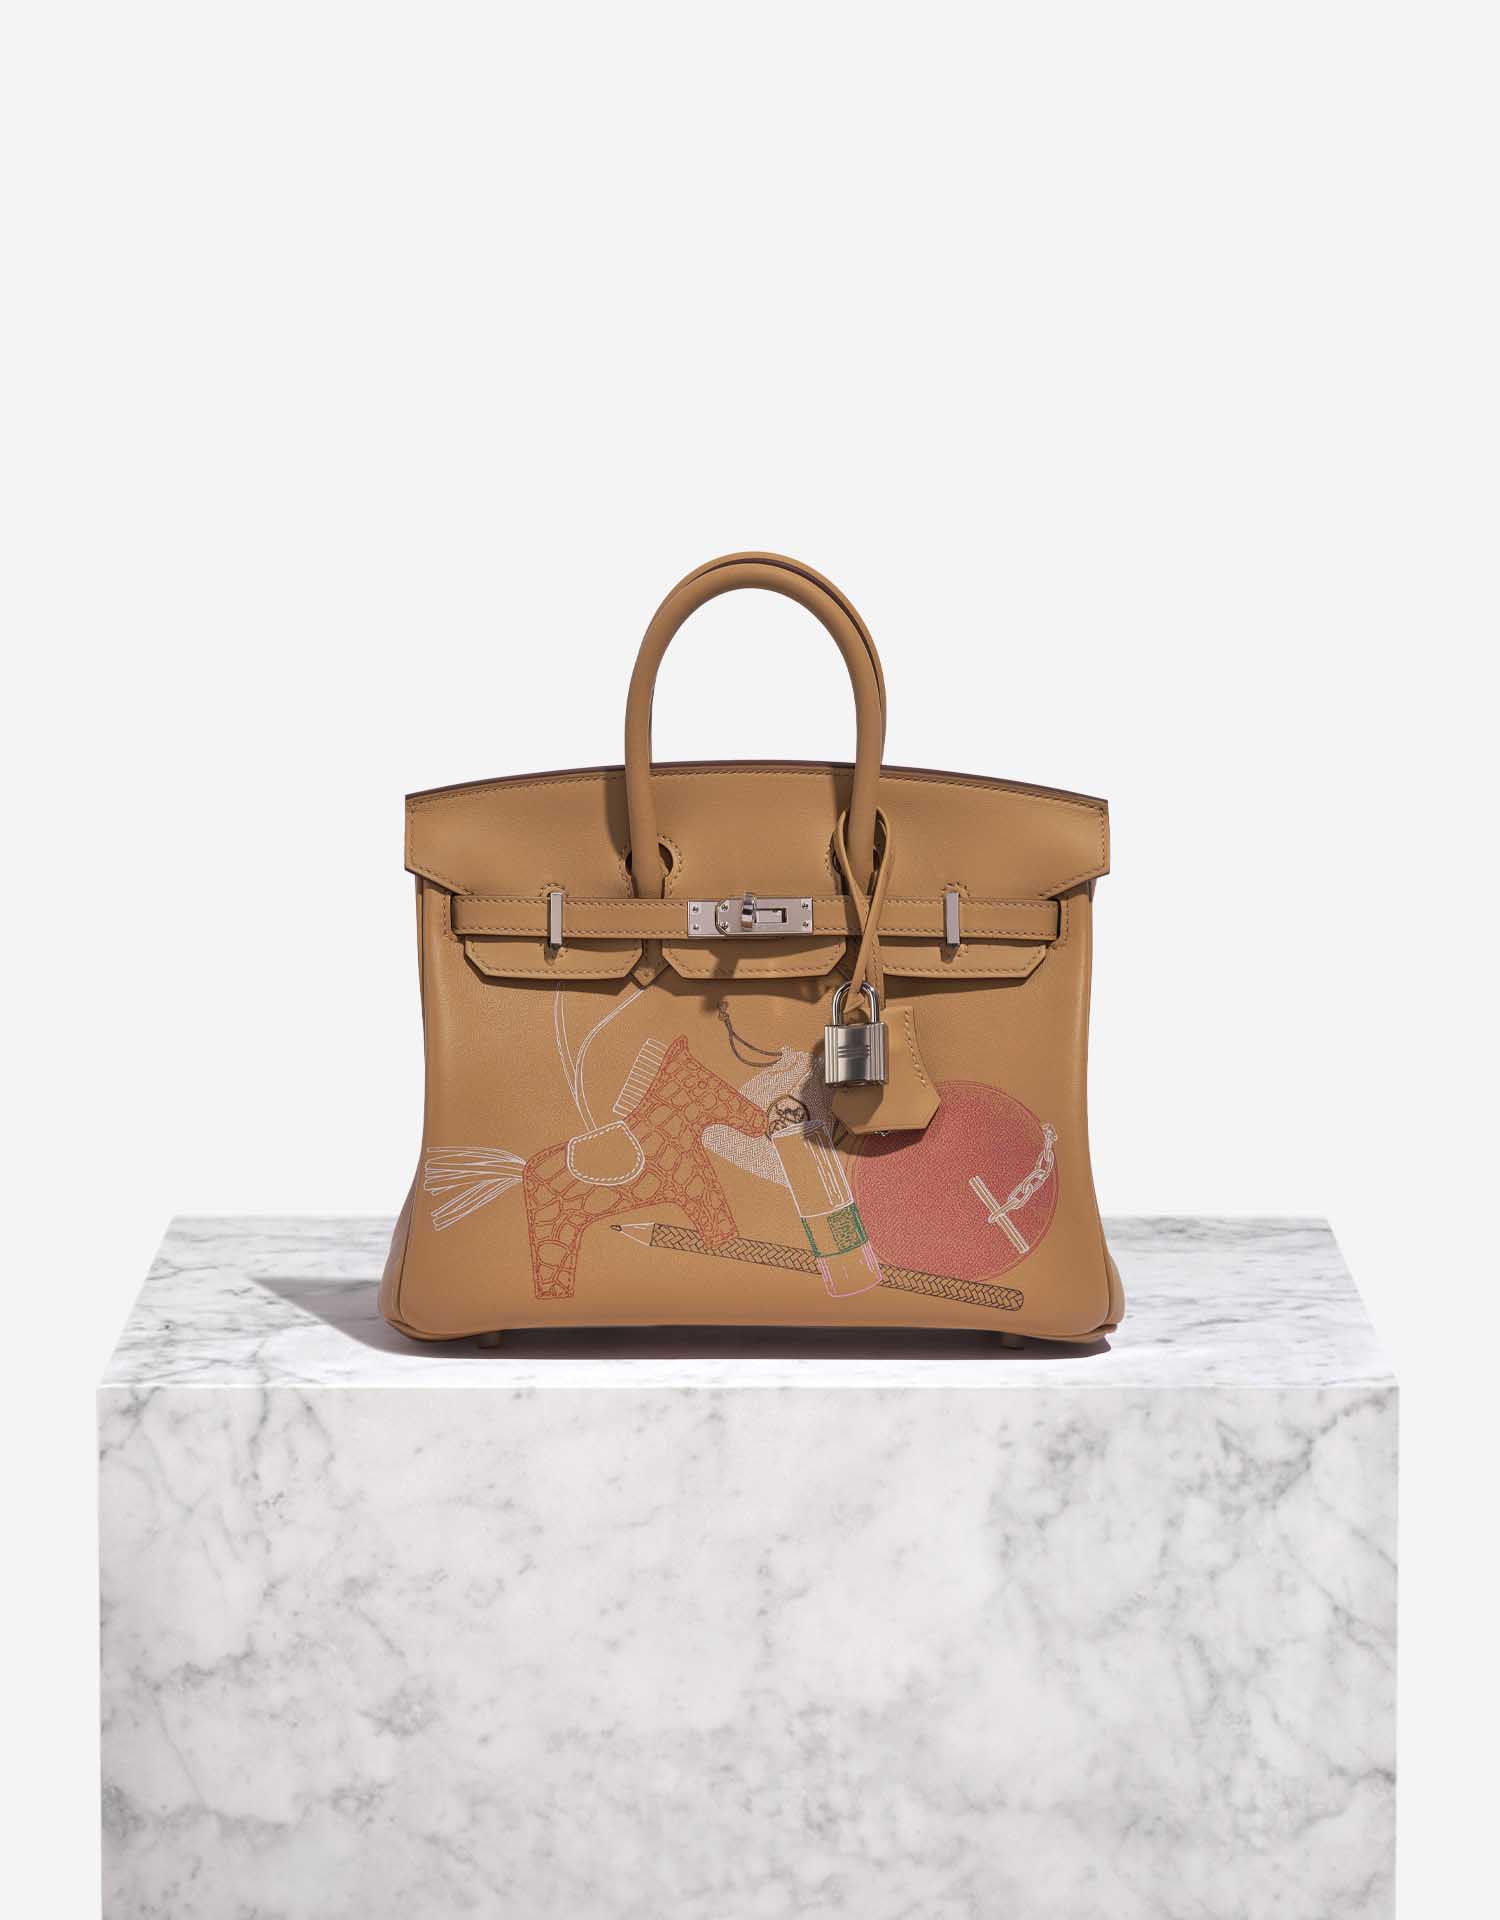 Birkins are over. Find your own iconic item. • Save. Spend. Splurge.